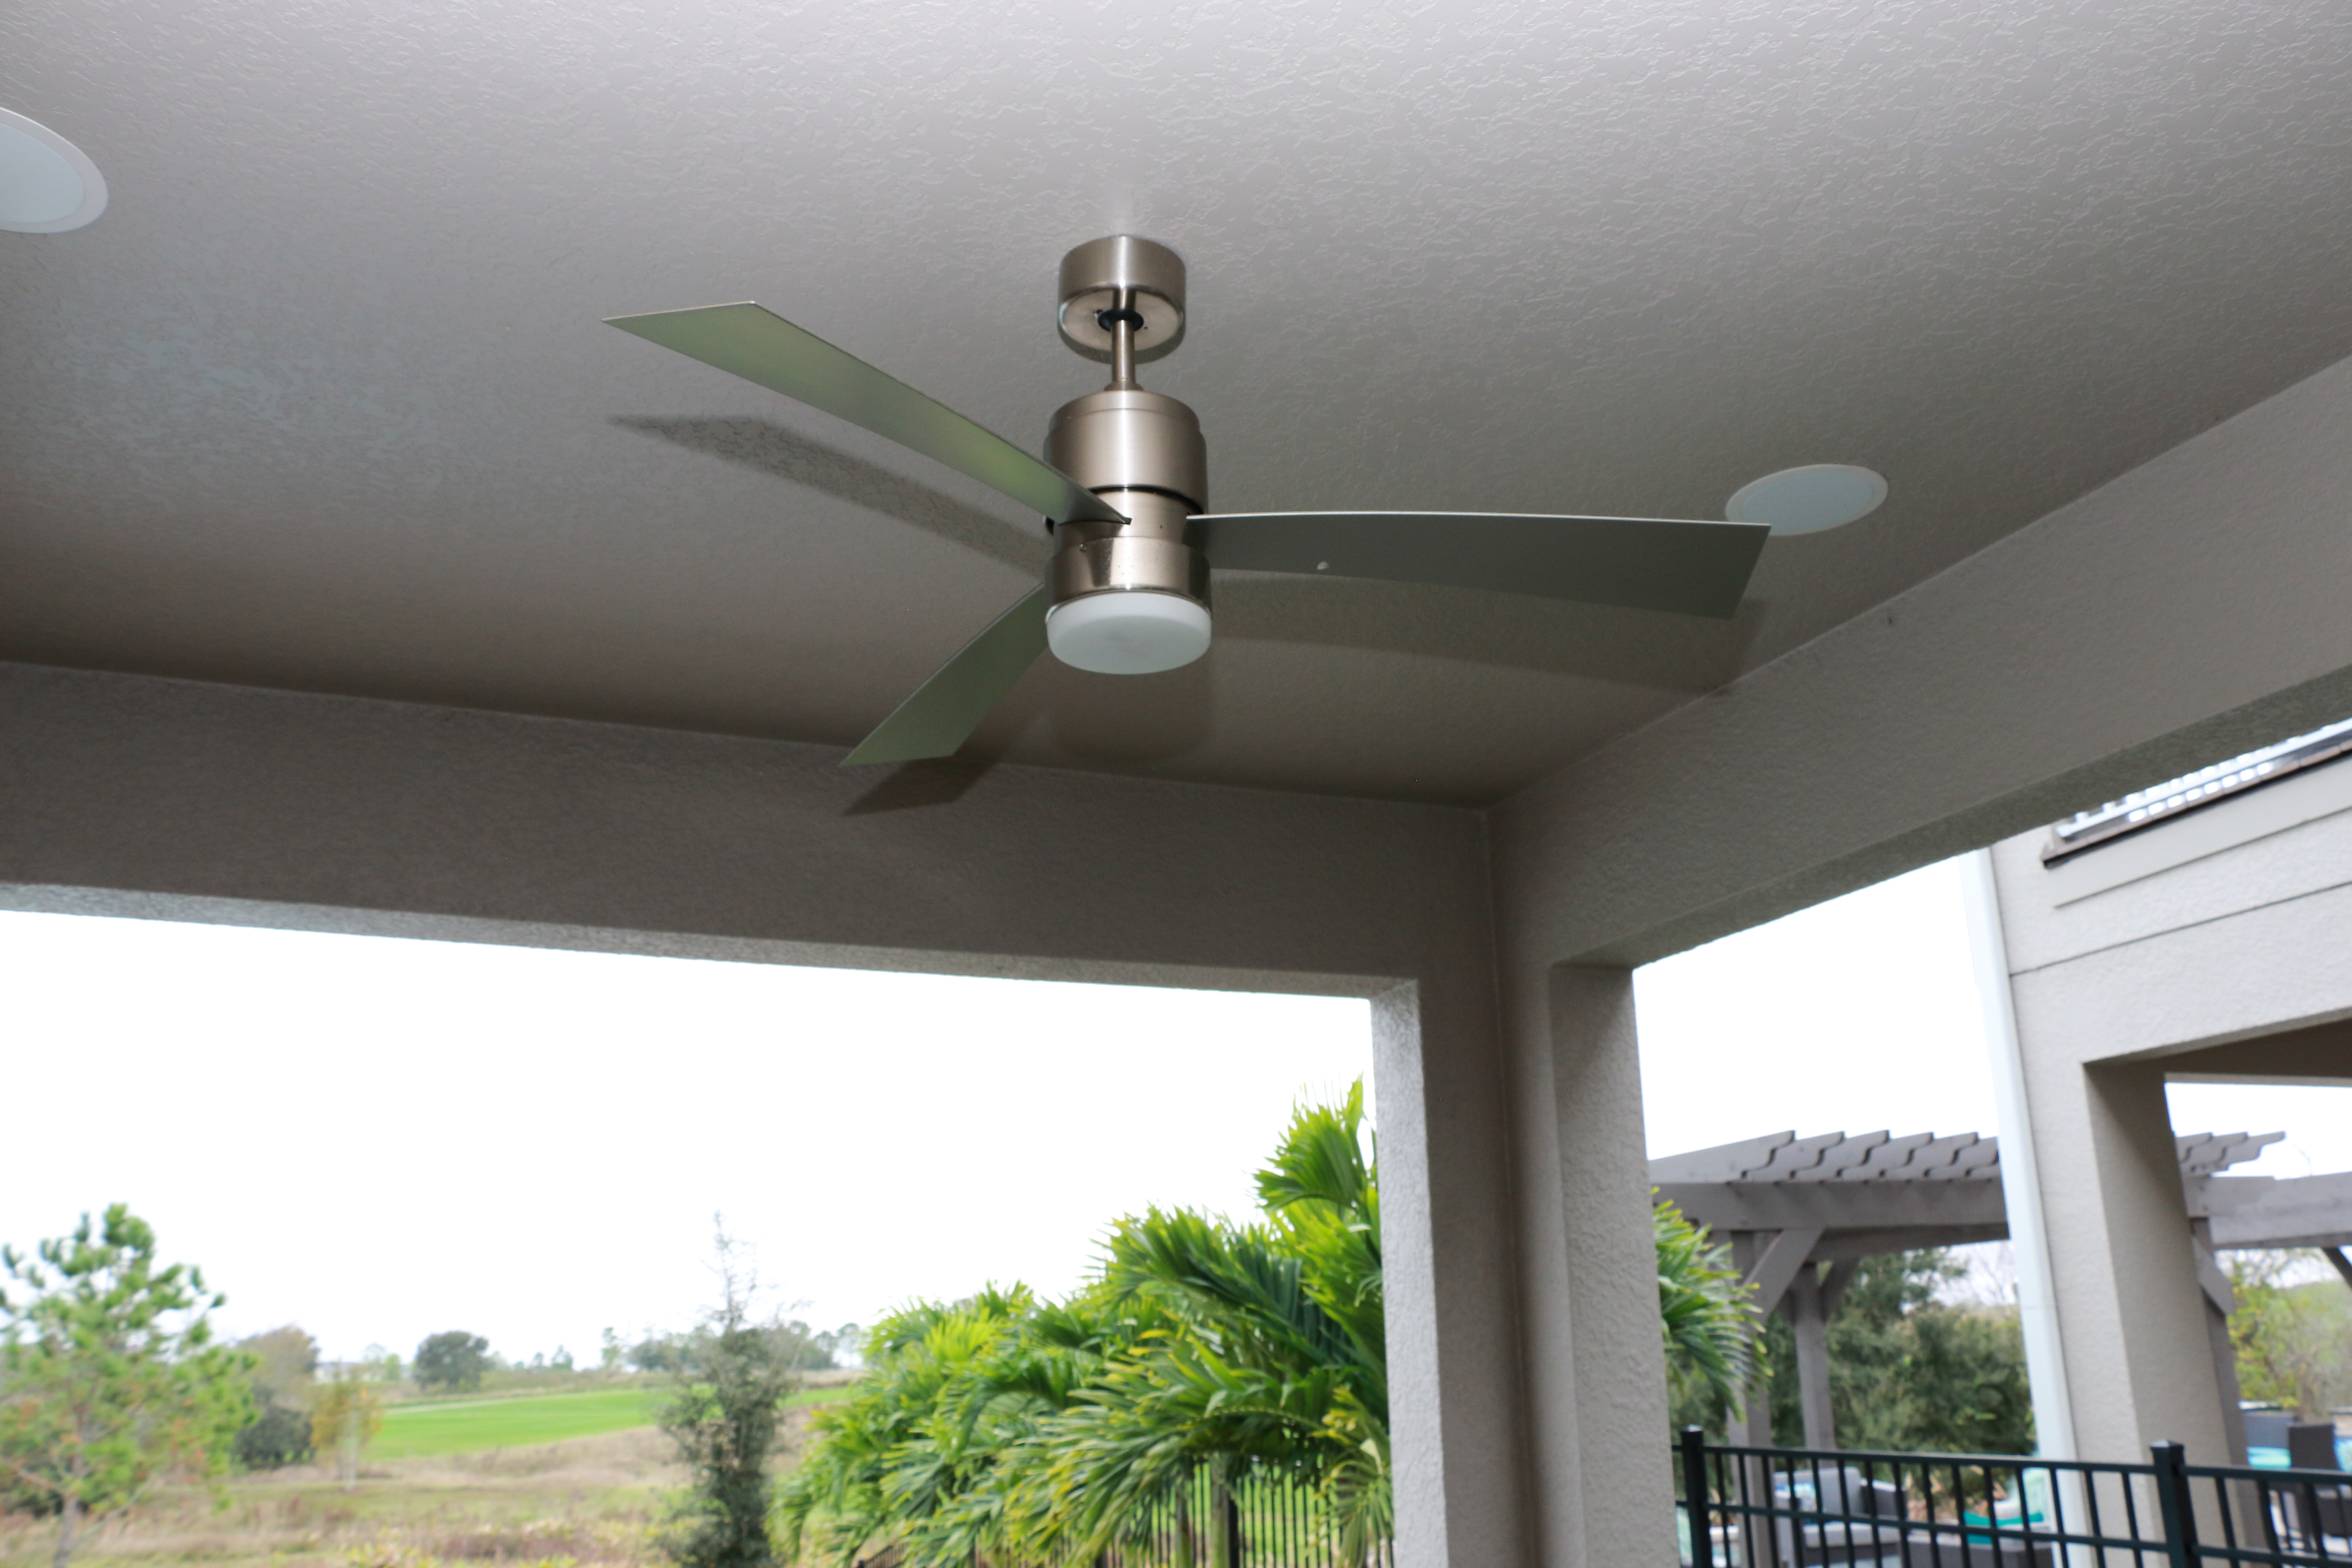 Orlando Electric Top 3 Reasons To Install Ceiling Fans